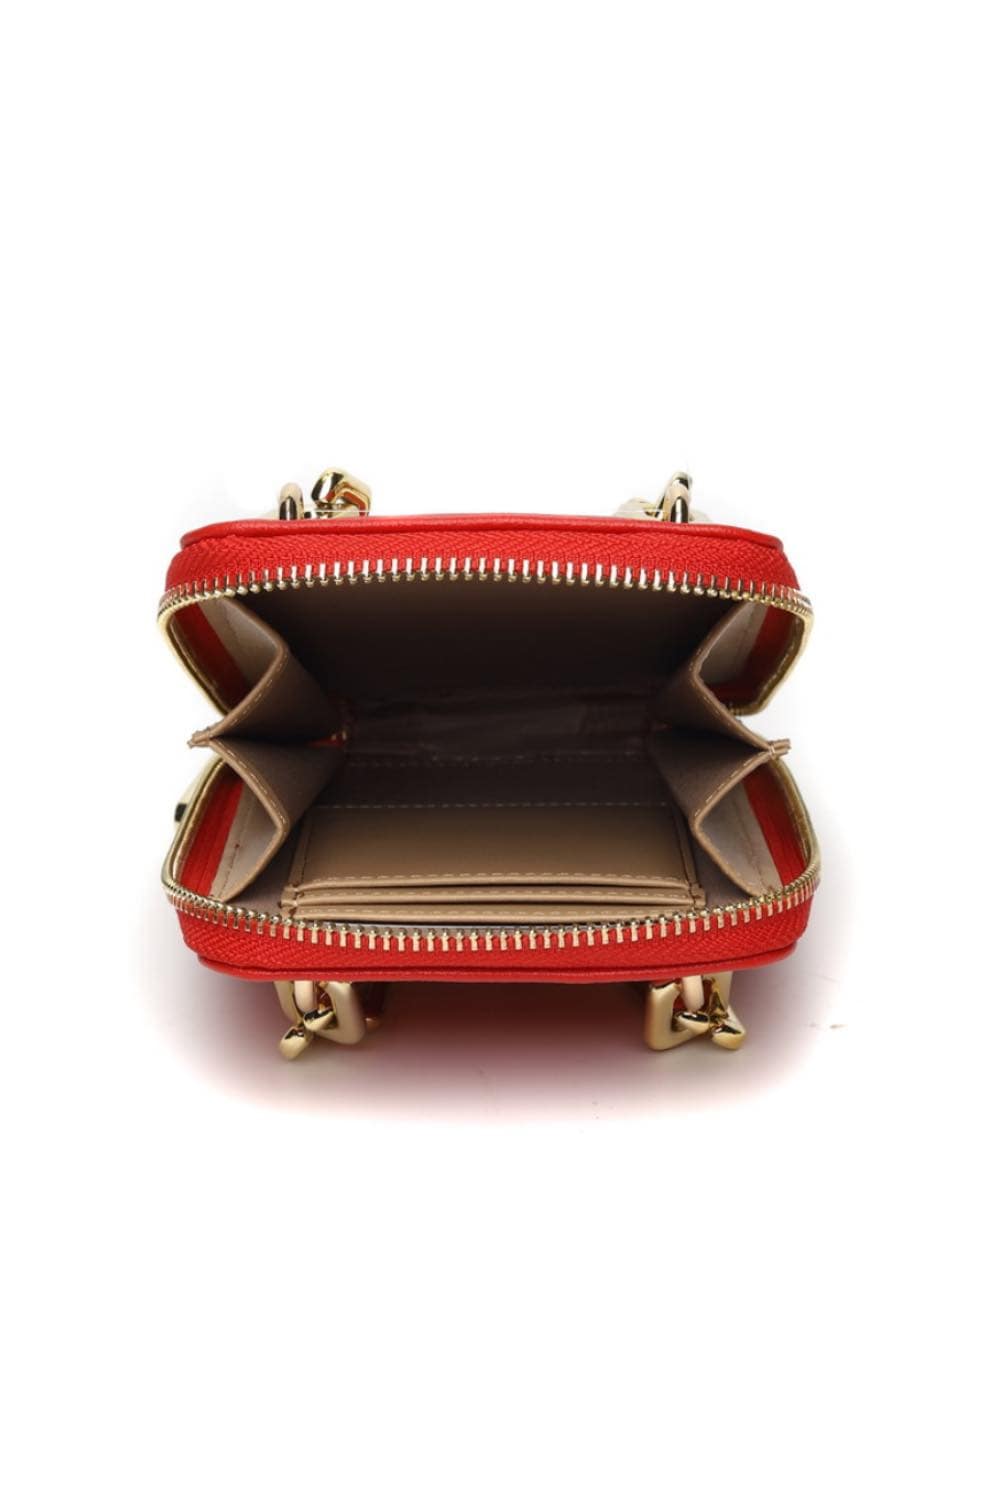 bessie-mini-bag-phone-carrier-with-chain-djv-boutique-red